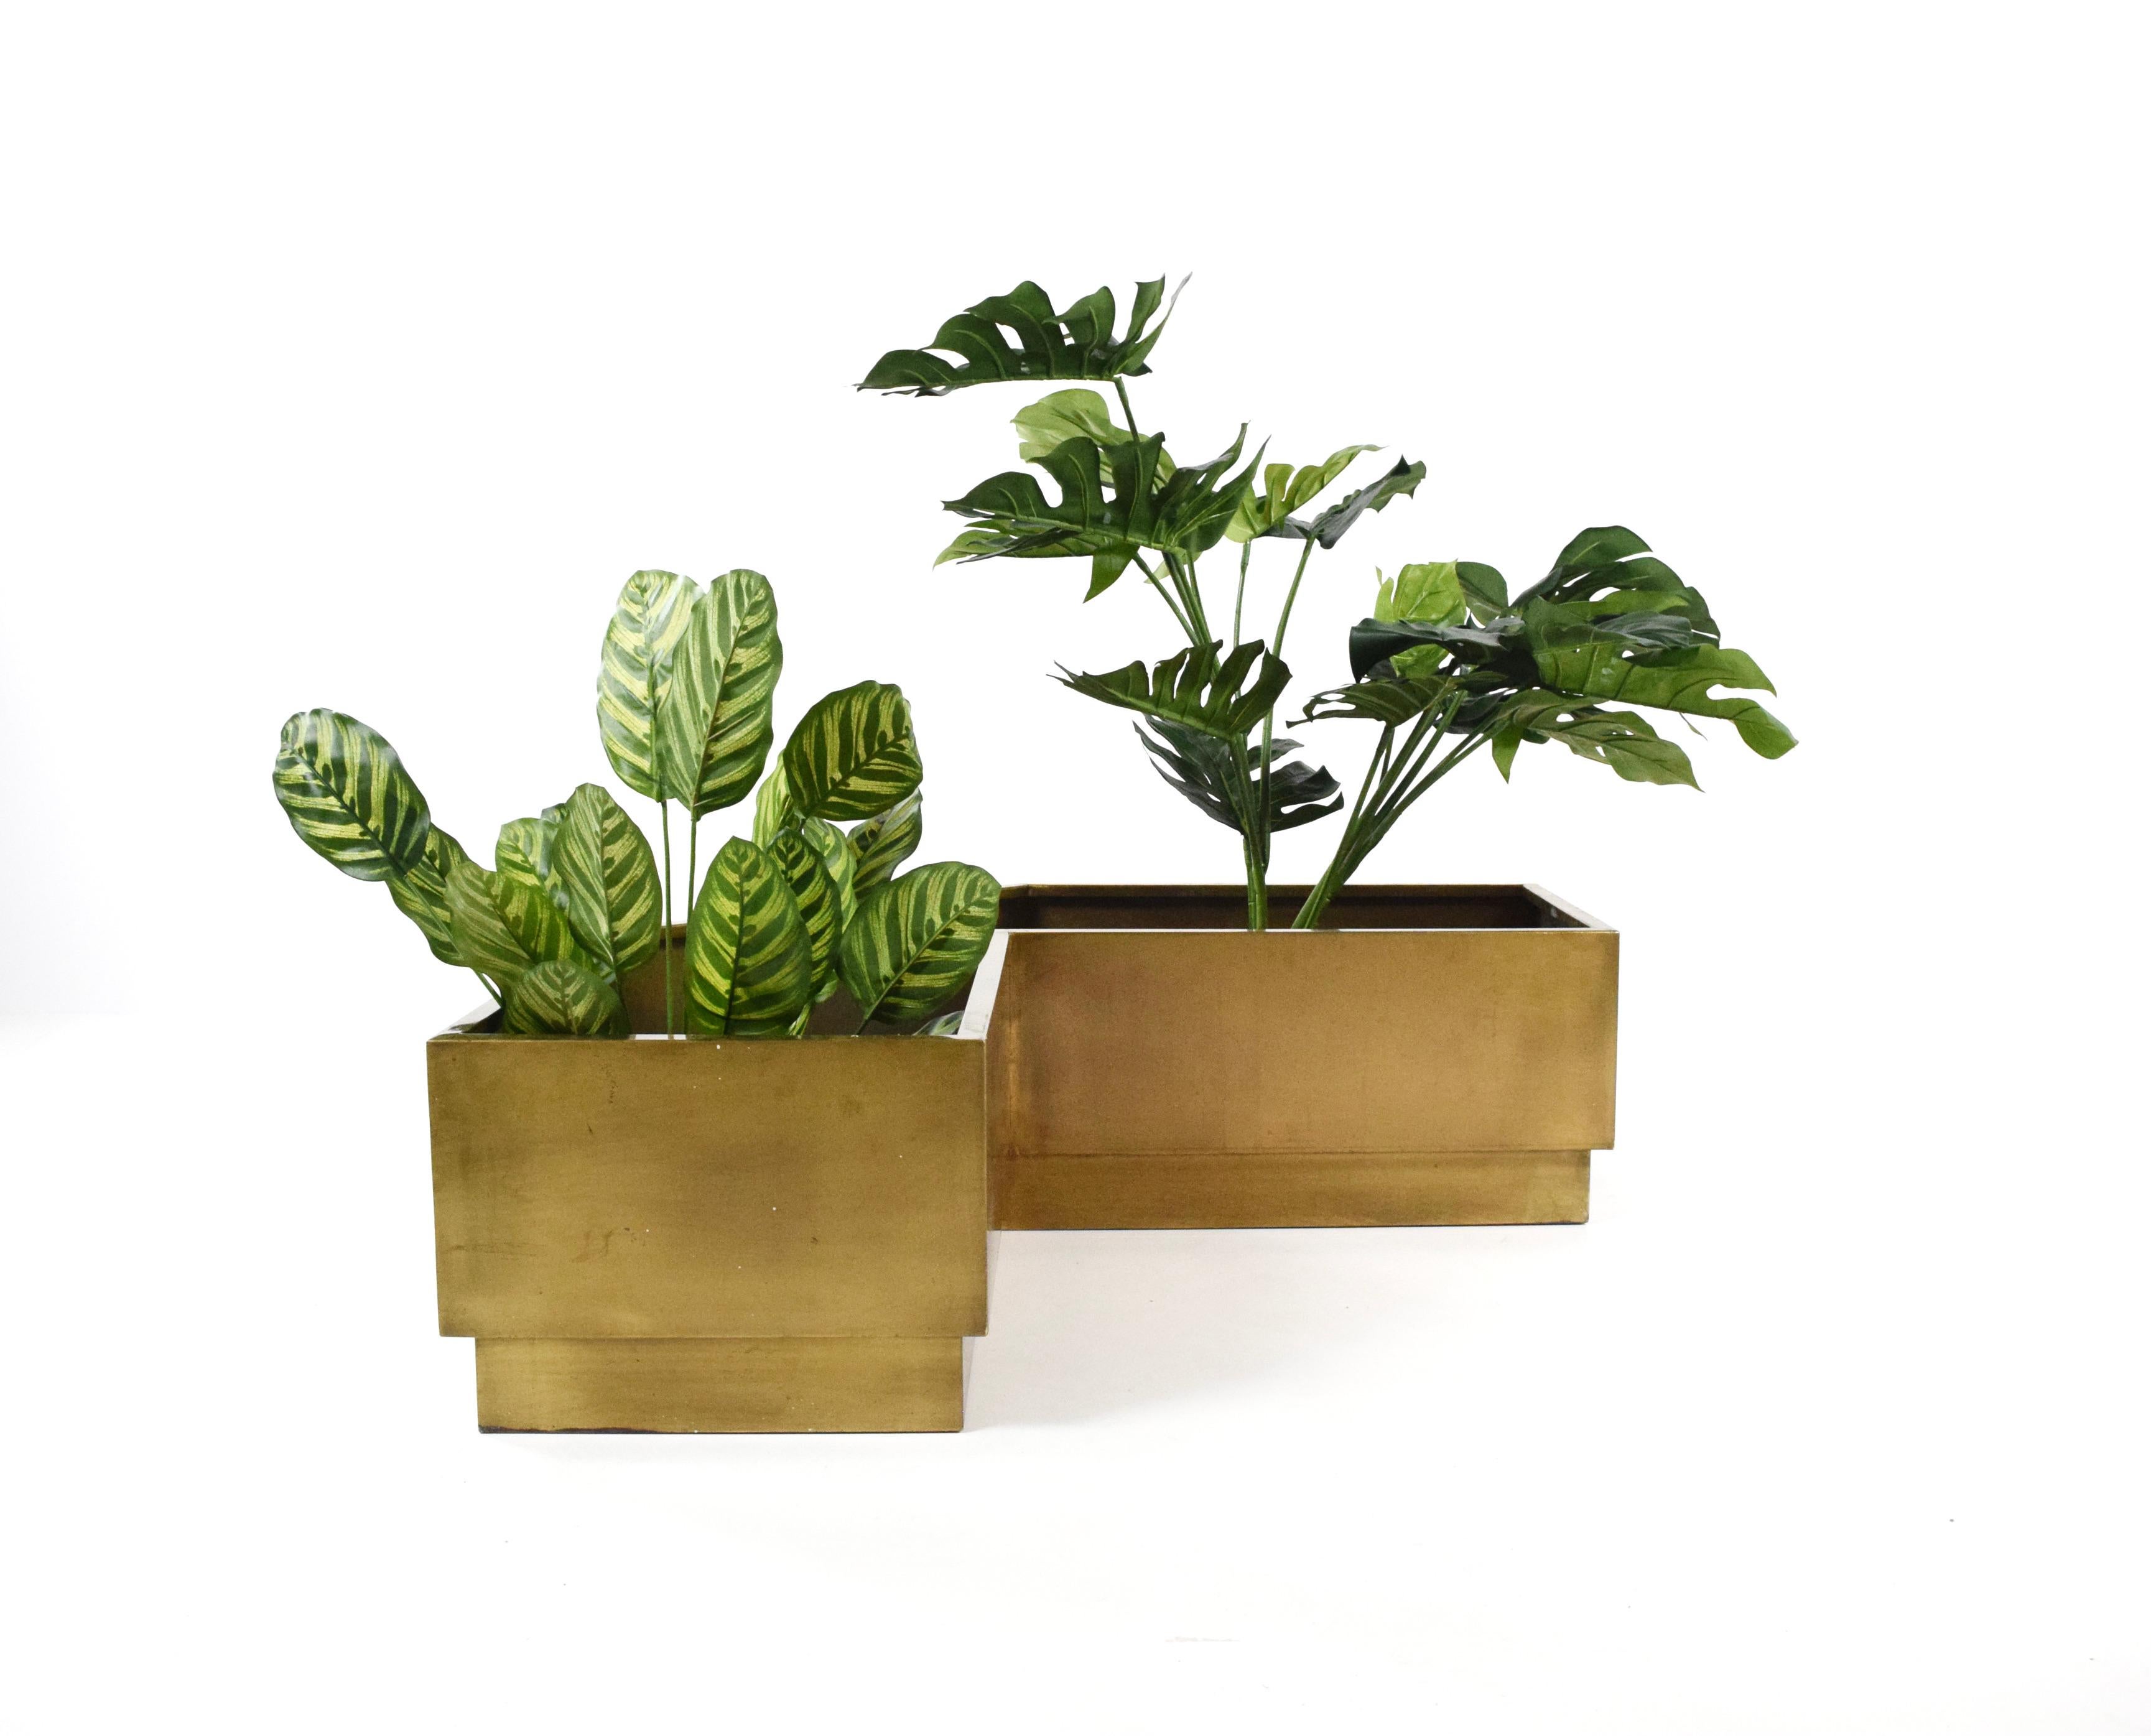 Highly Decorative Large Vintage Corner Planter in Brass, 1980s. This brings a luxury golden color and warmth to your interior and is unique in its shape and size. It fits multiple large plants. The planter can be placed around a corner like a sofa,